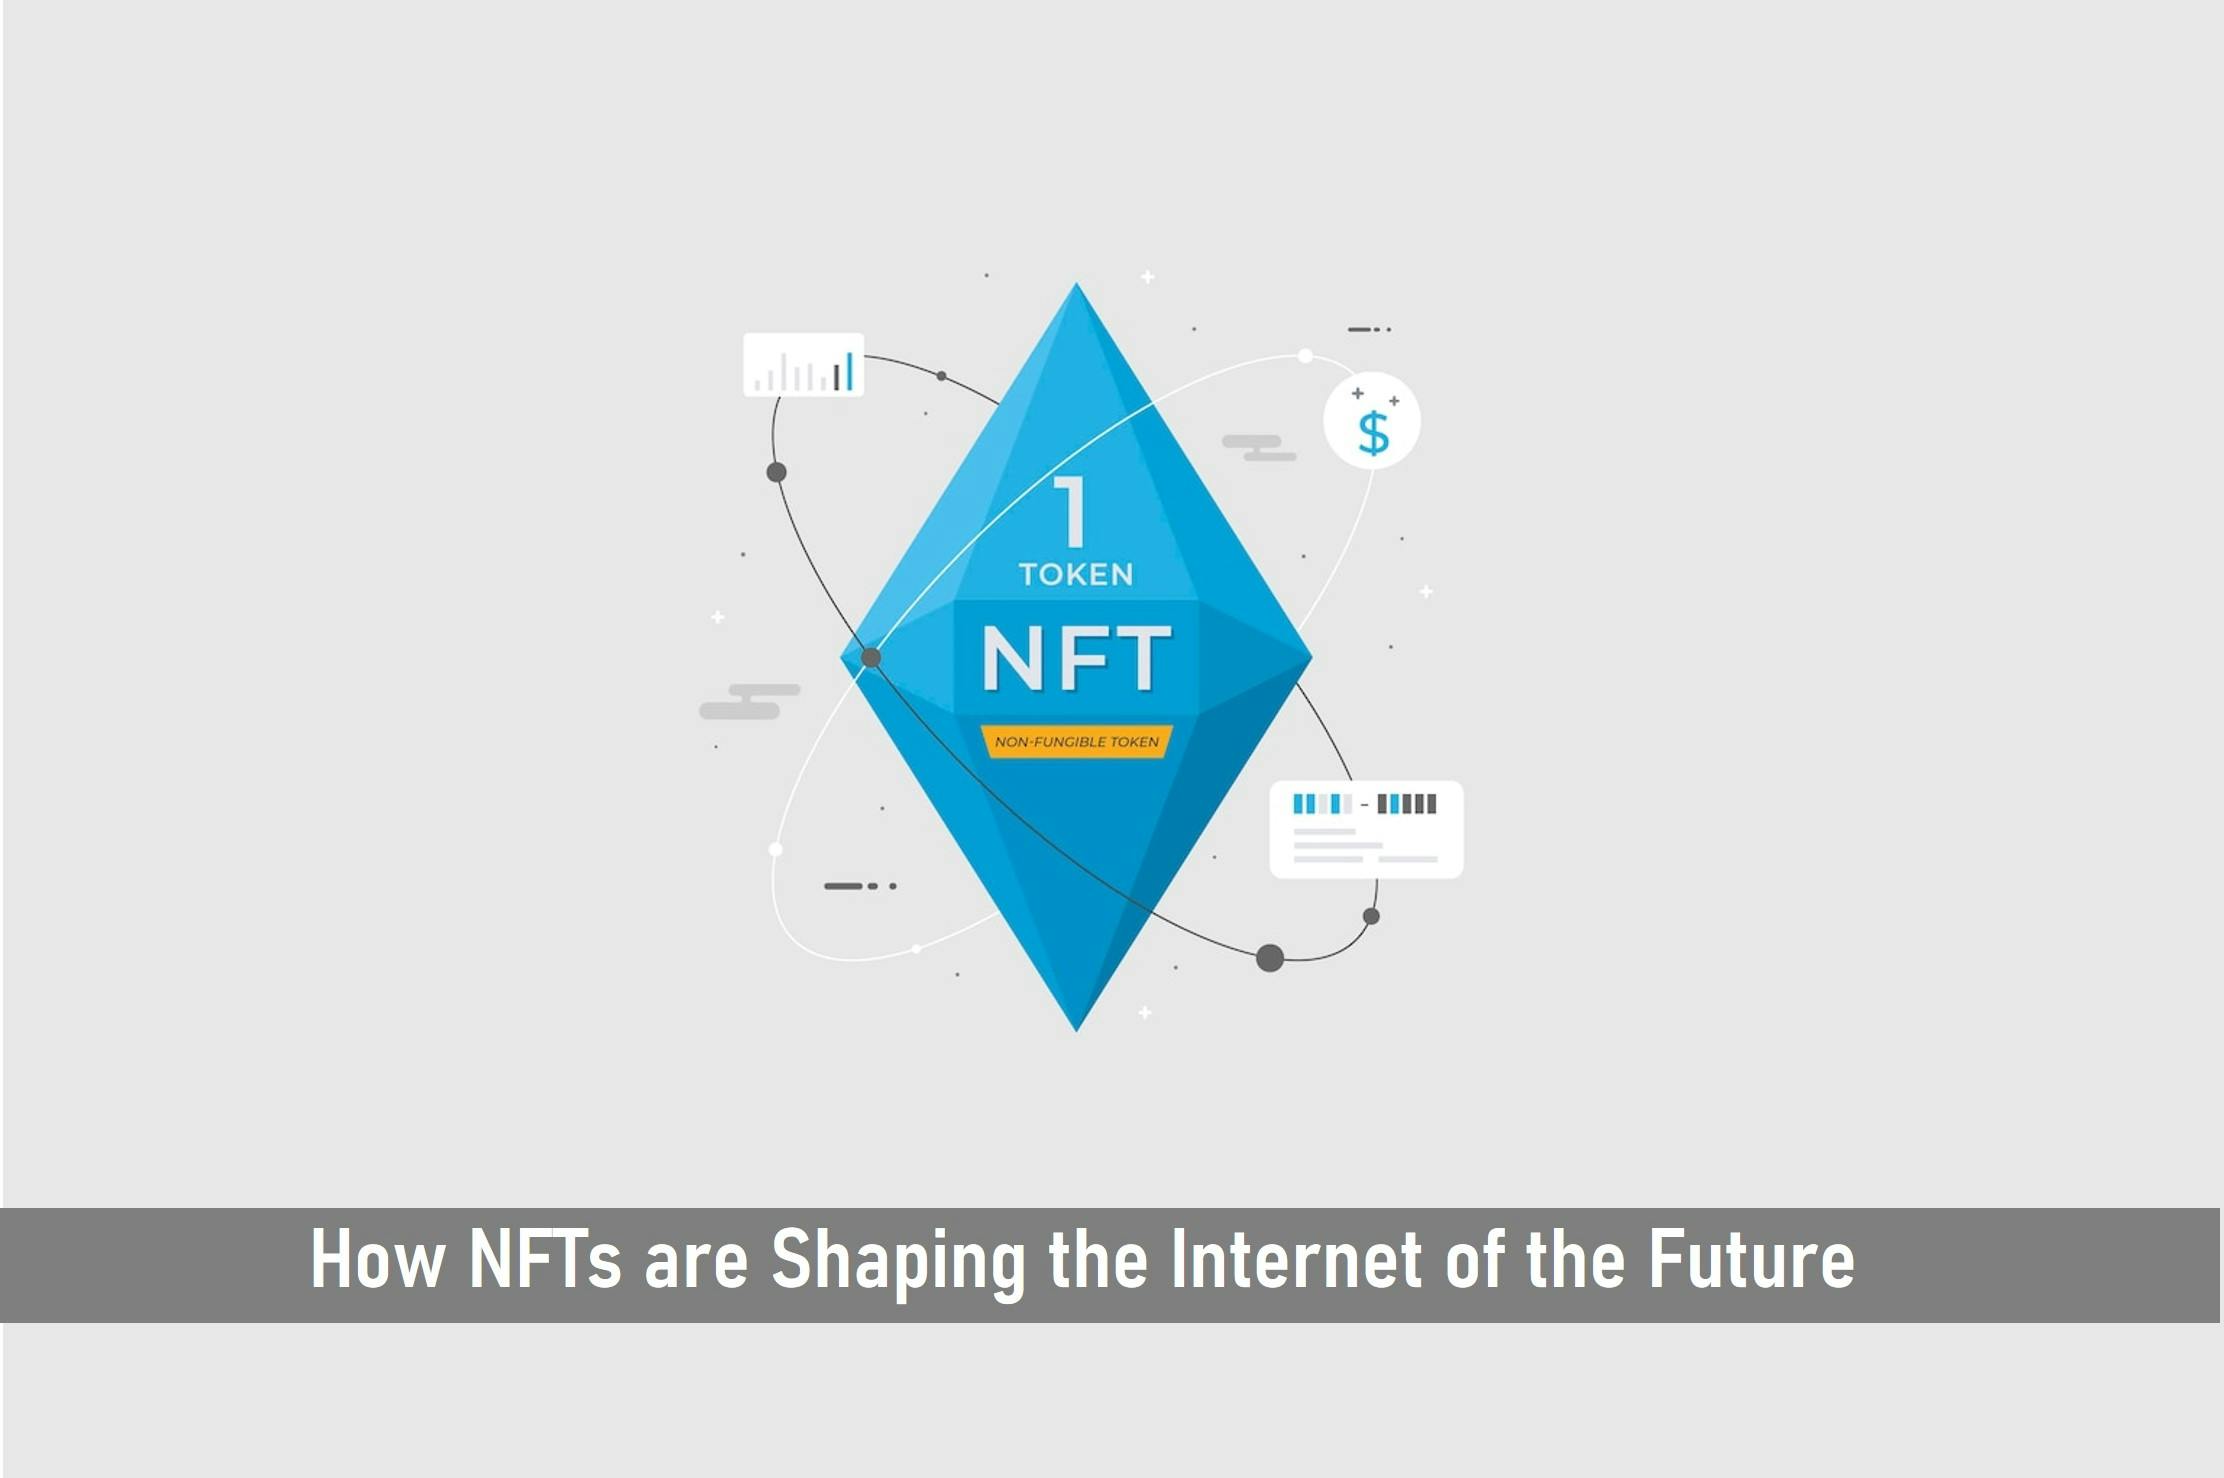 How NFTs are Shaping the Internet of the Future